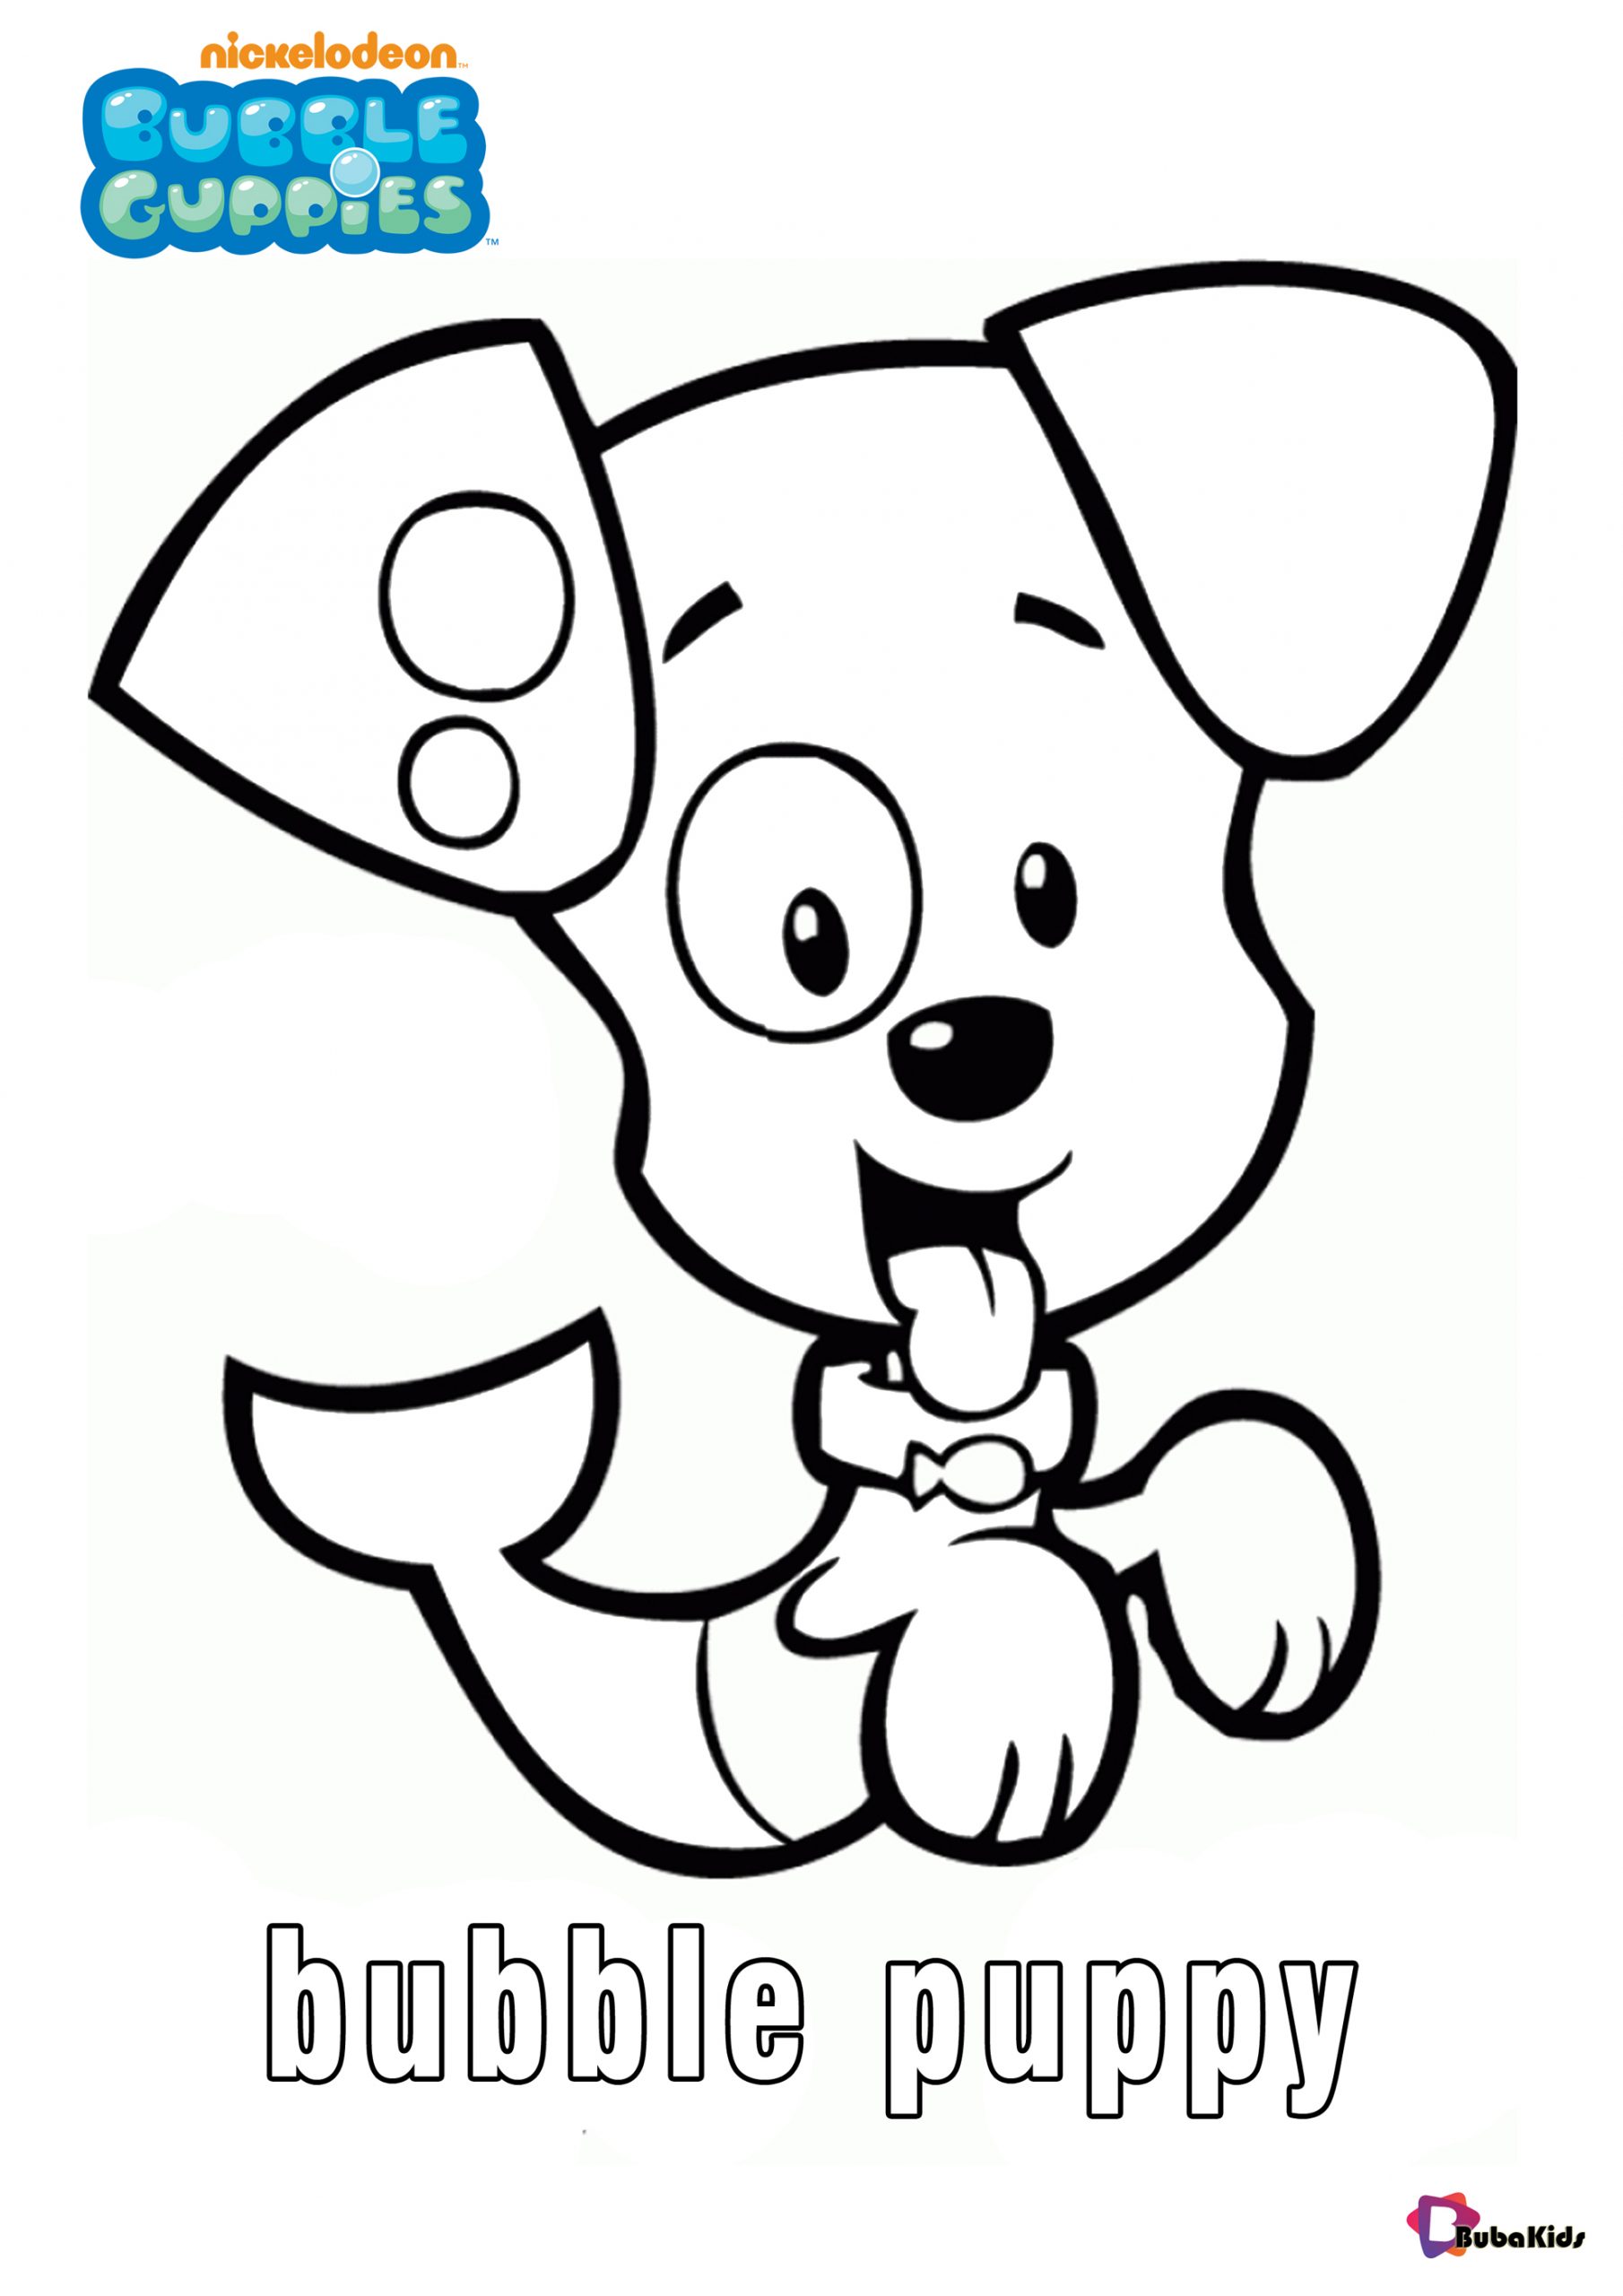 Printable Bubble Guppies character coloring pages  Bubble Puppy Wallpaper